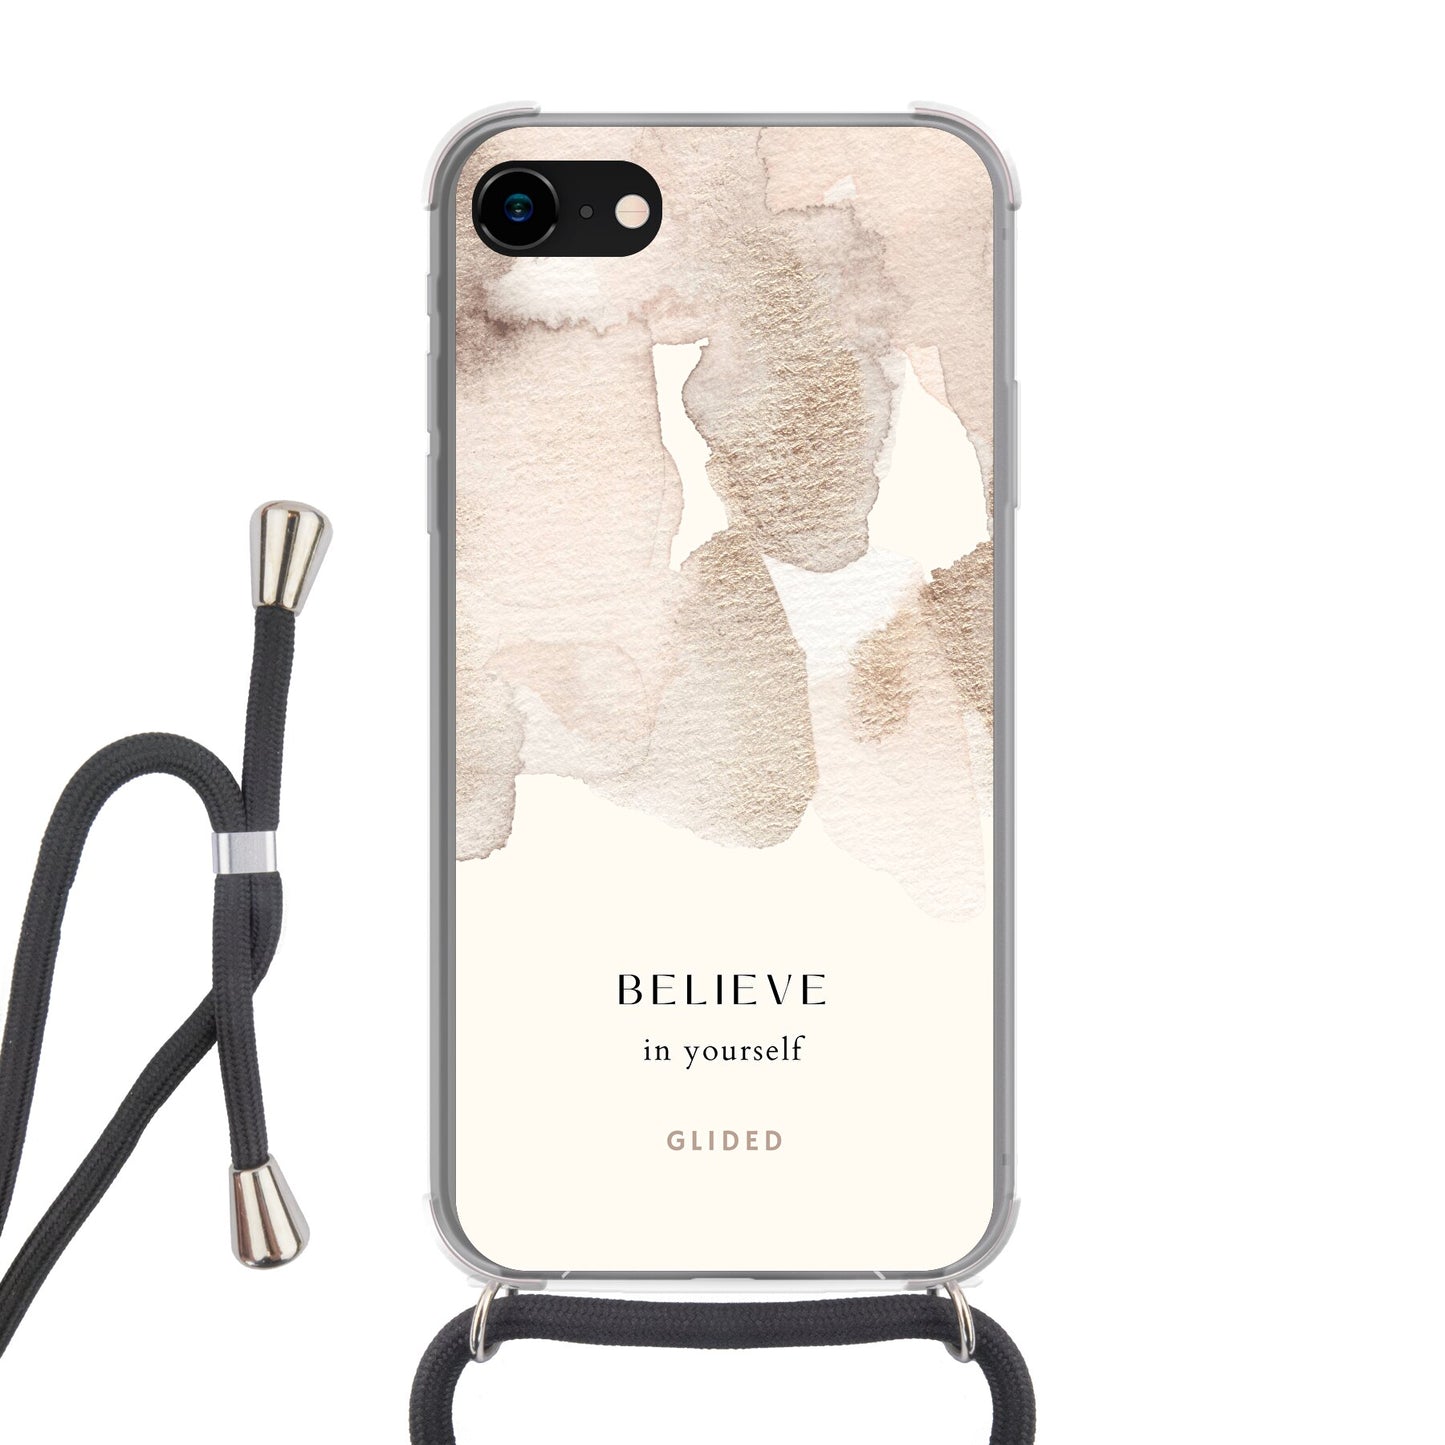 Believe in yourself - iPhone 7 Handyhülle Crossbody case mit Band